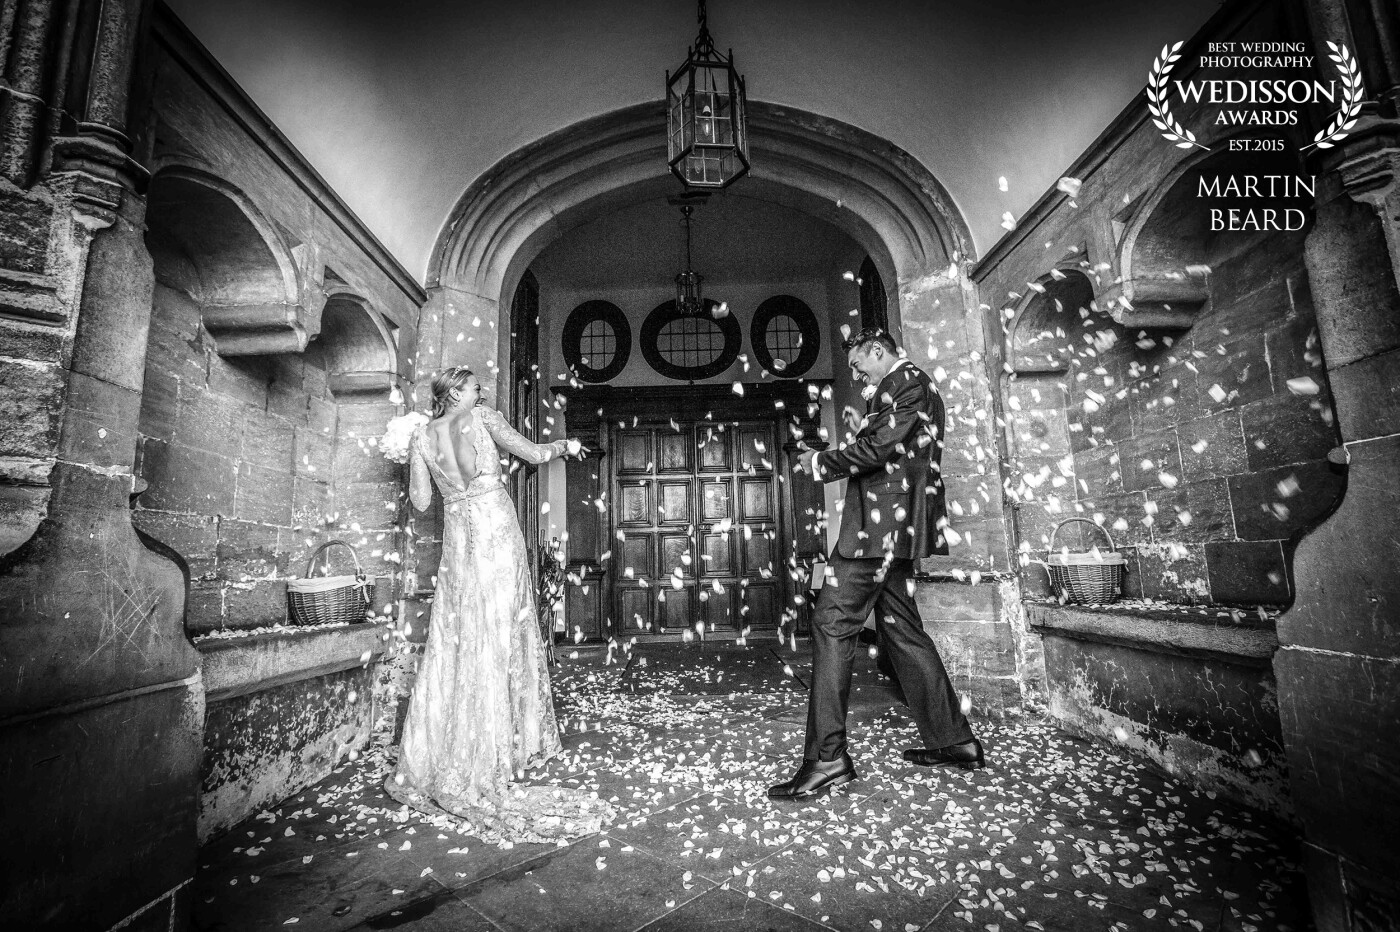 Love this spontaneous confetti fight at Hengrave Hall, wonderful wedding.................................................................................